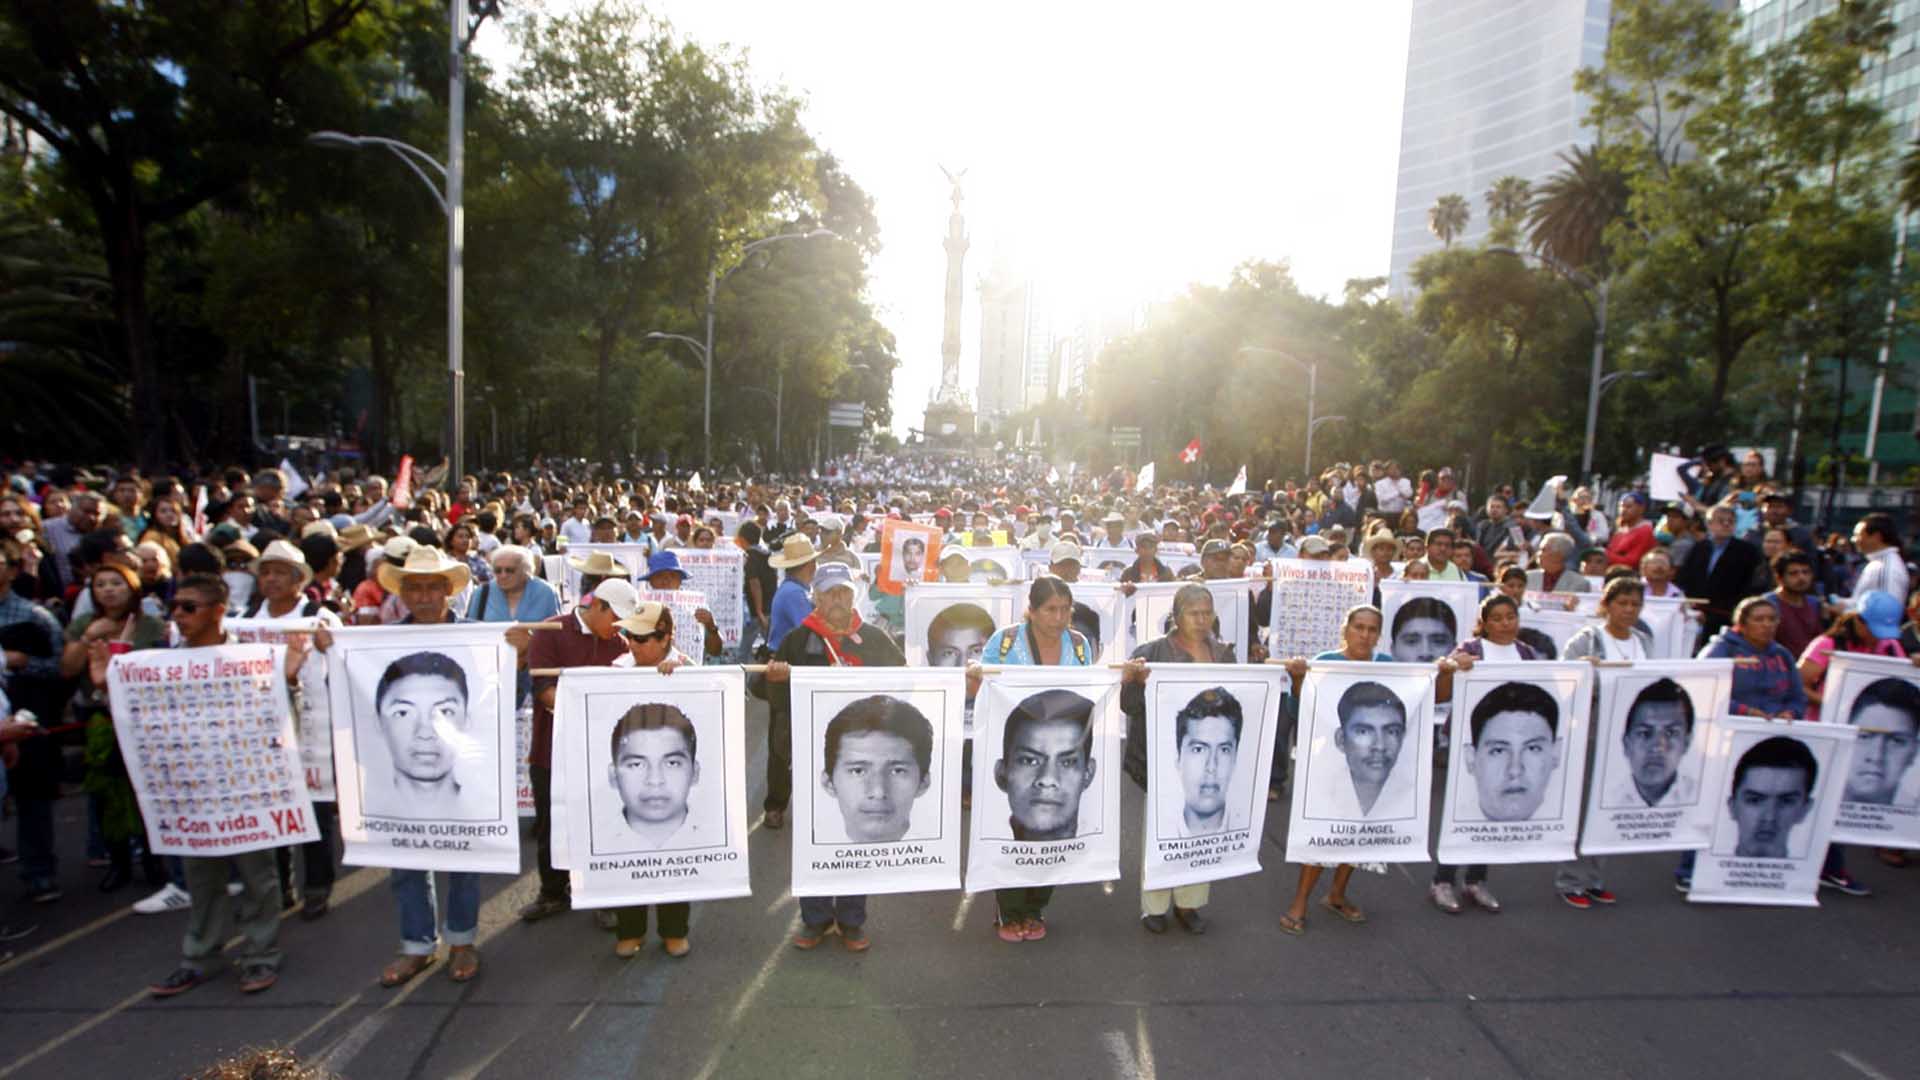 Mexico: How to repudiate the electoral trap?